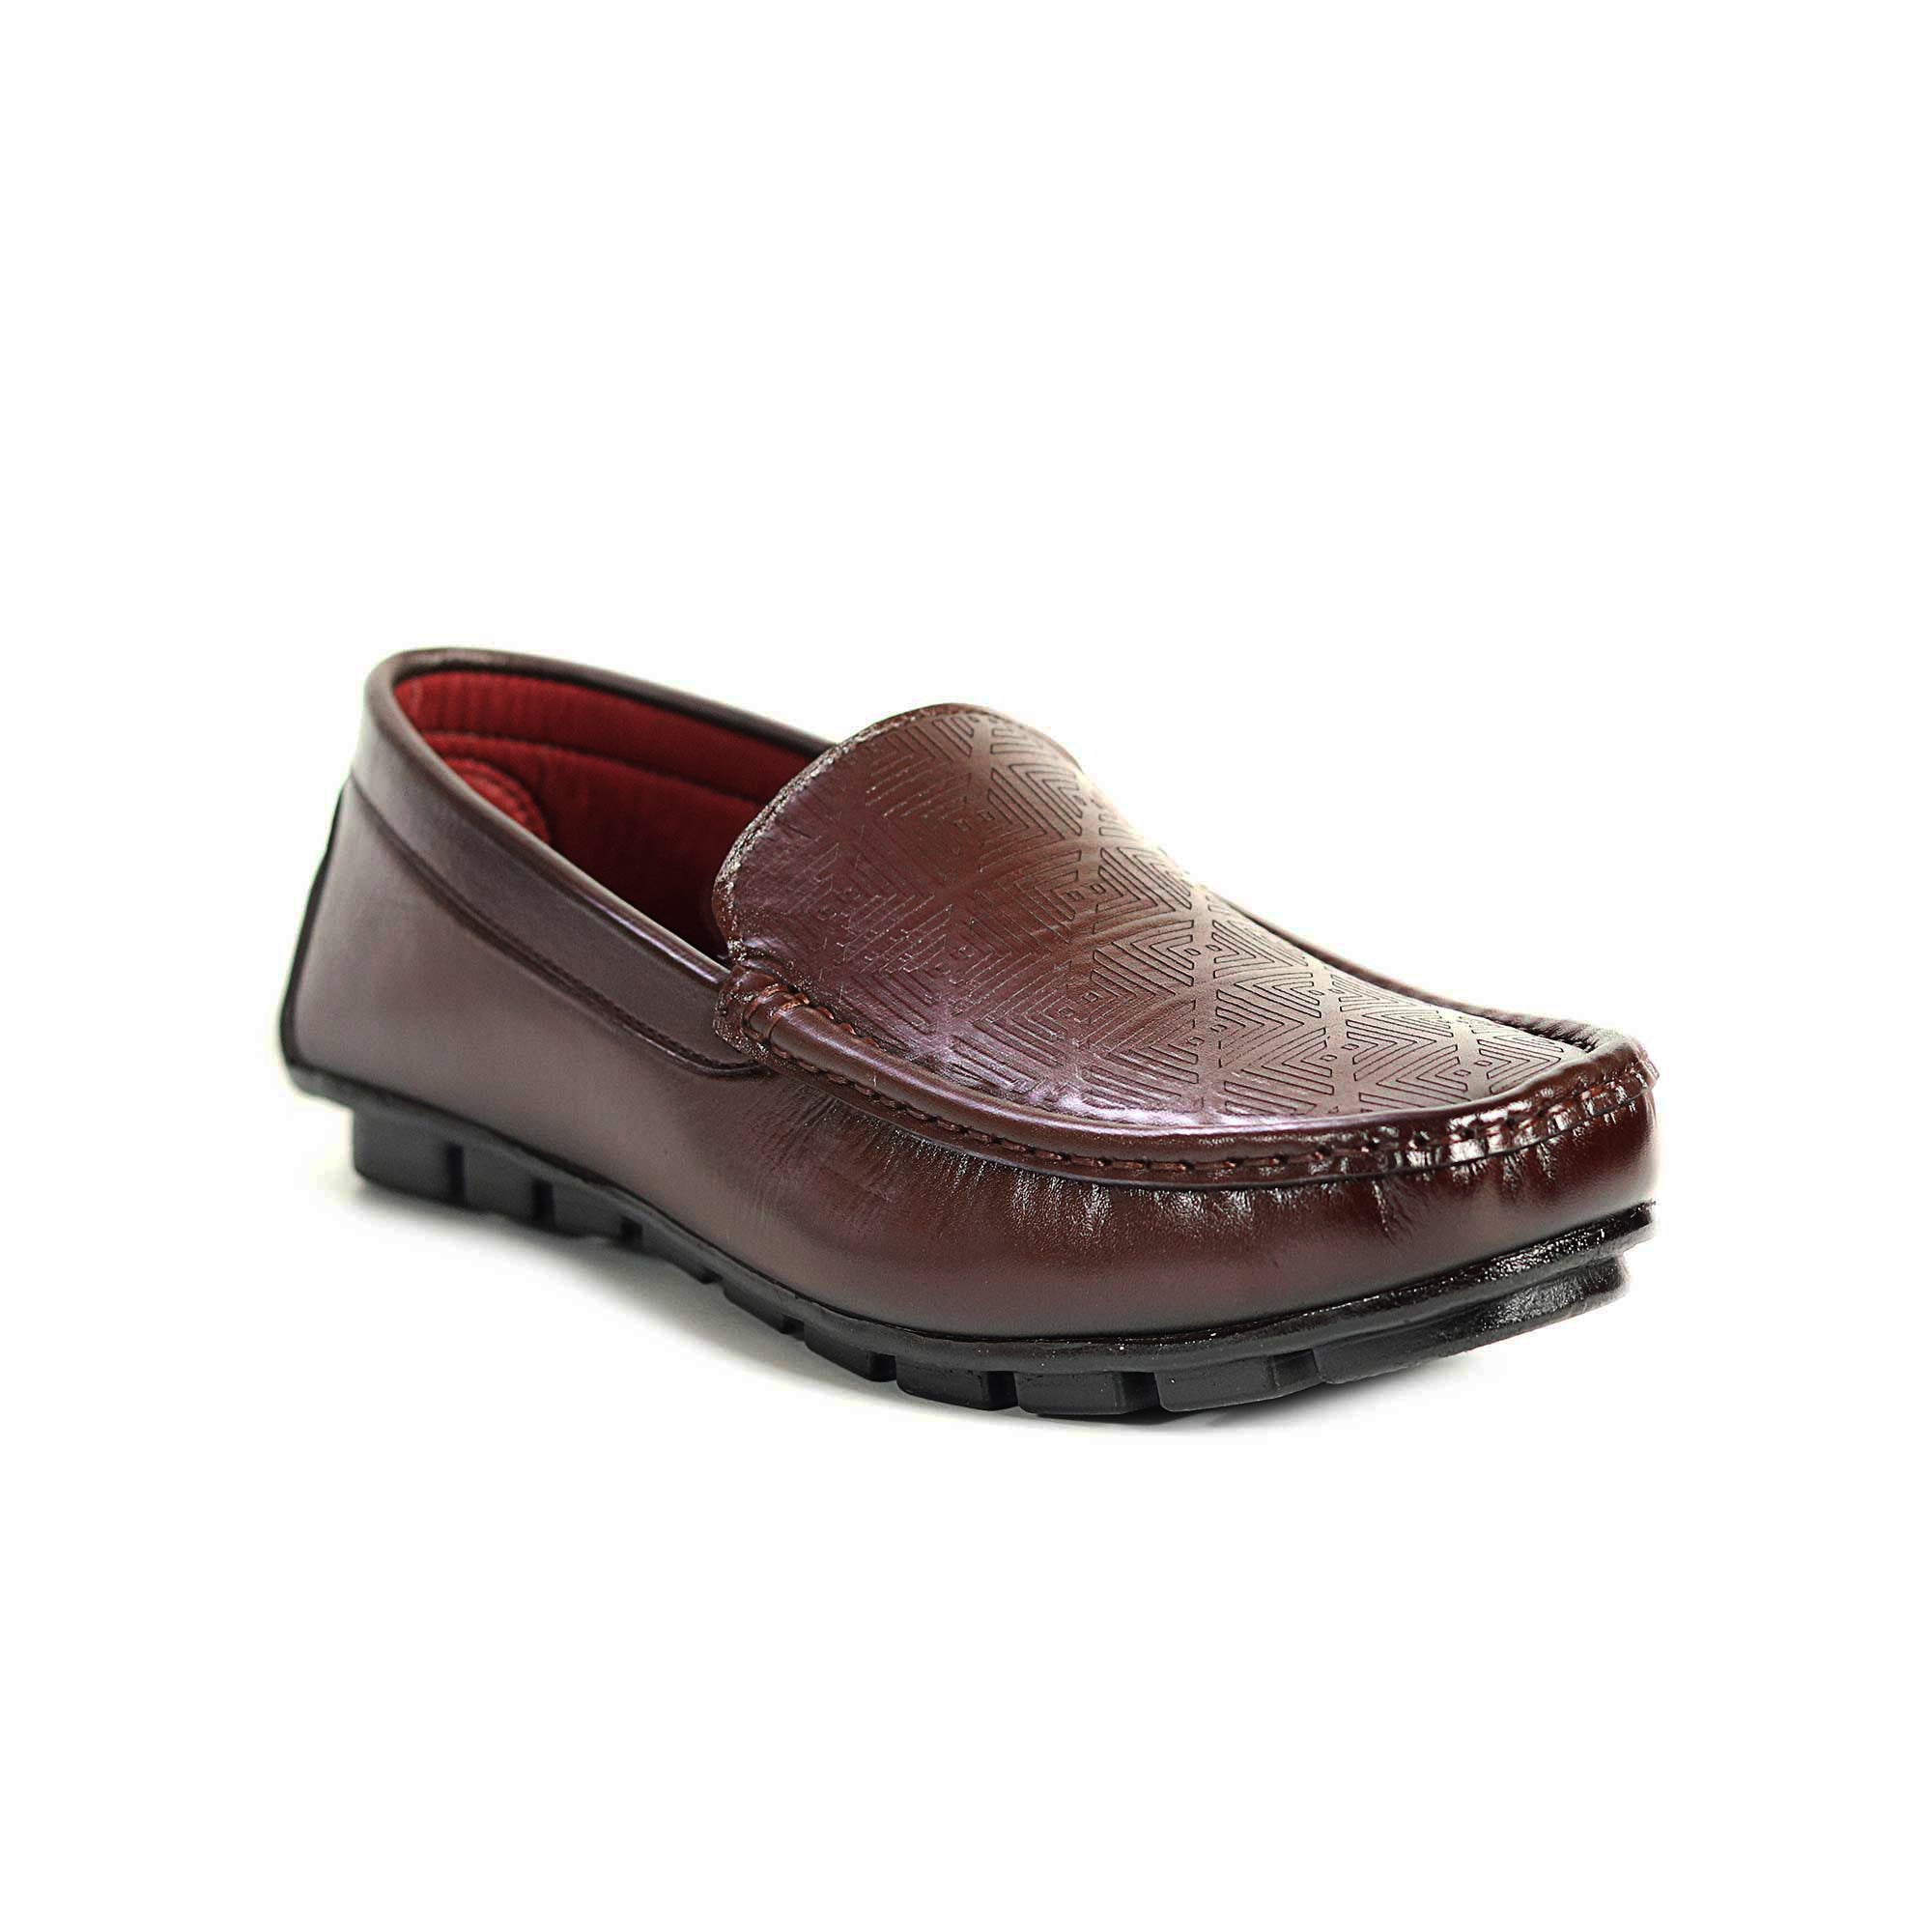 Zays Leather Premium Loafer For Men (Chocolate)- SF71